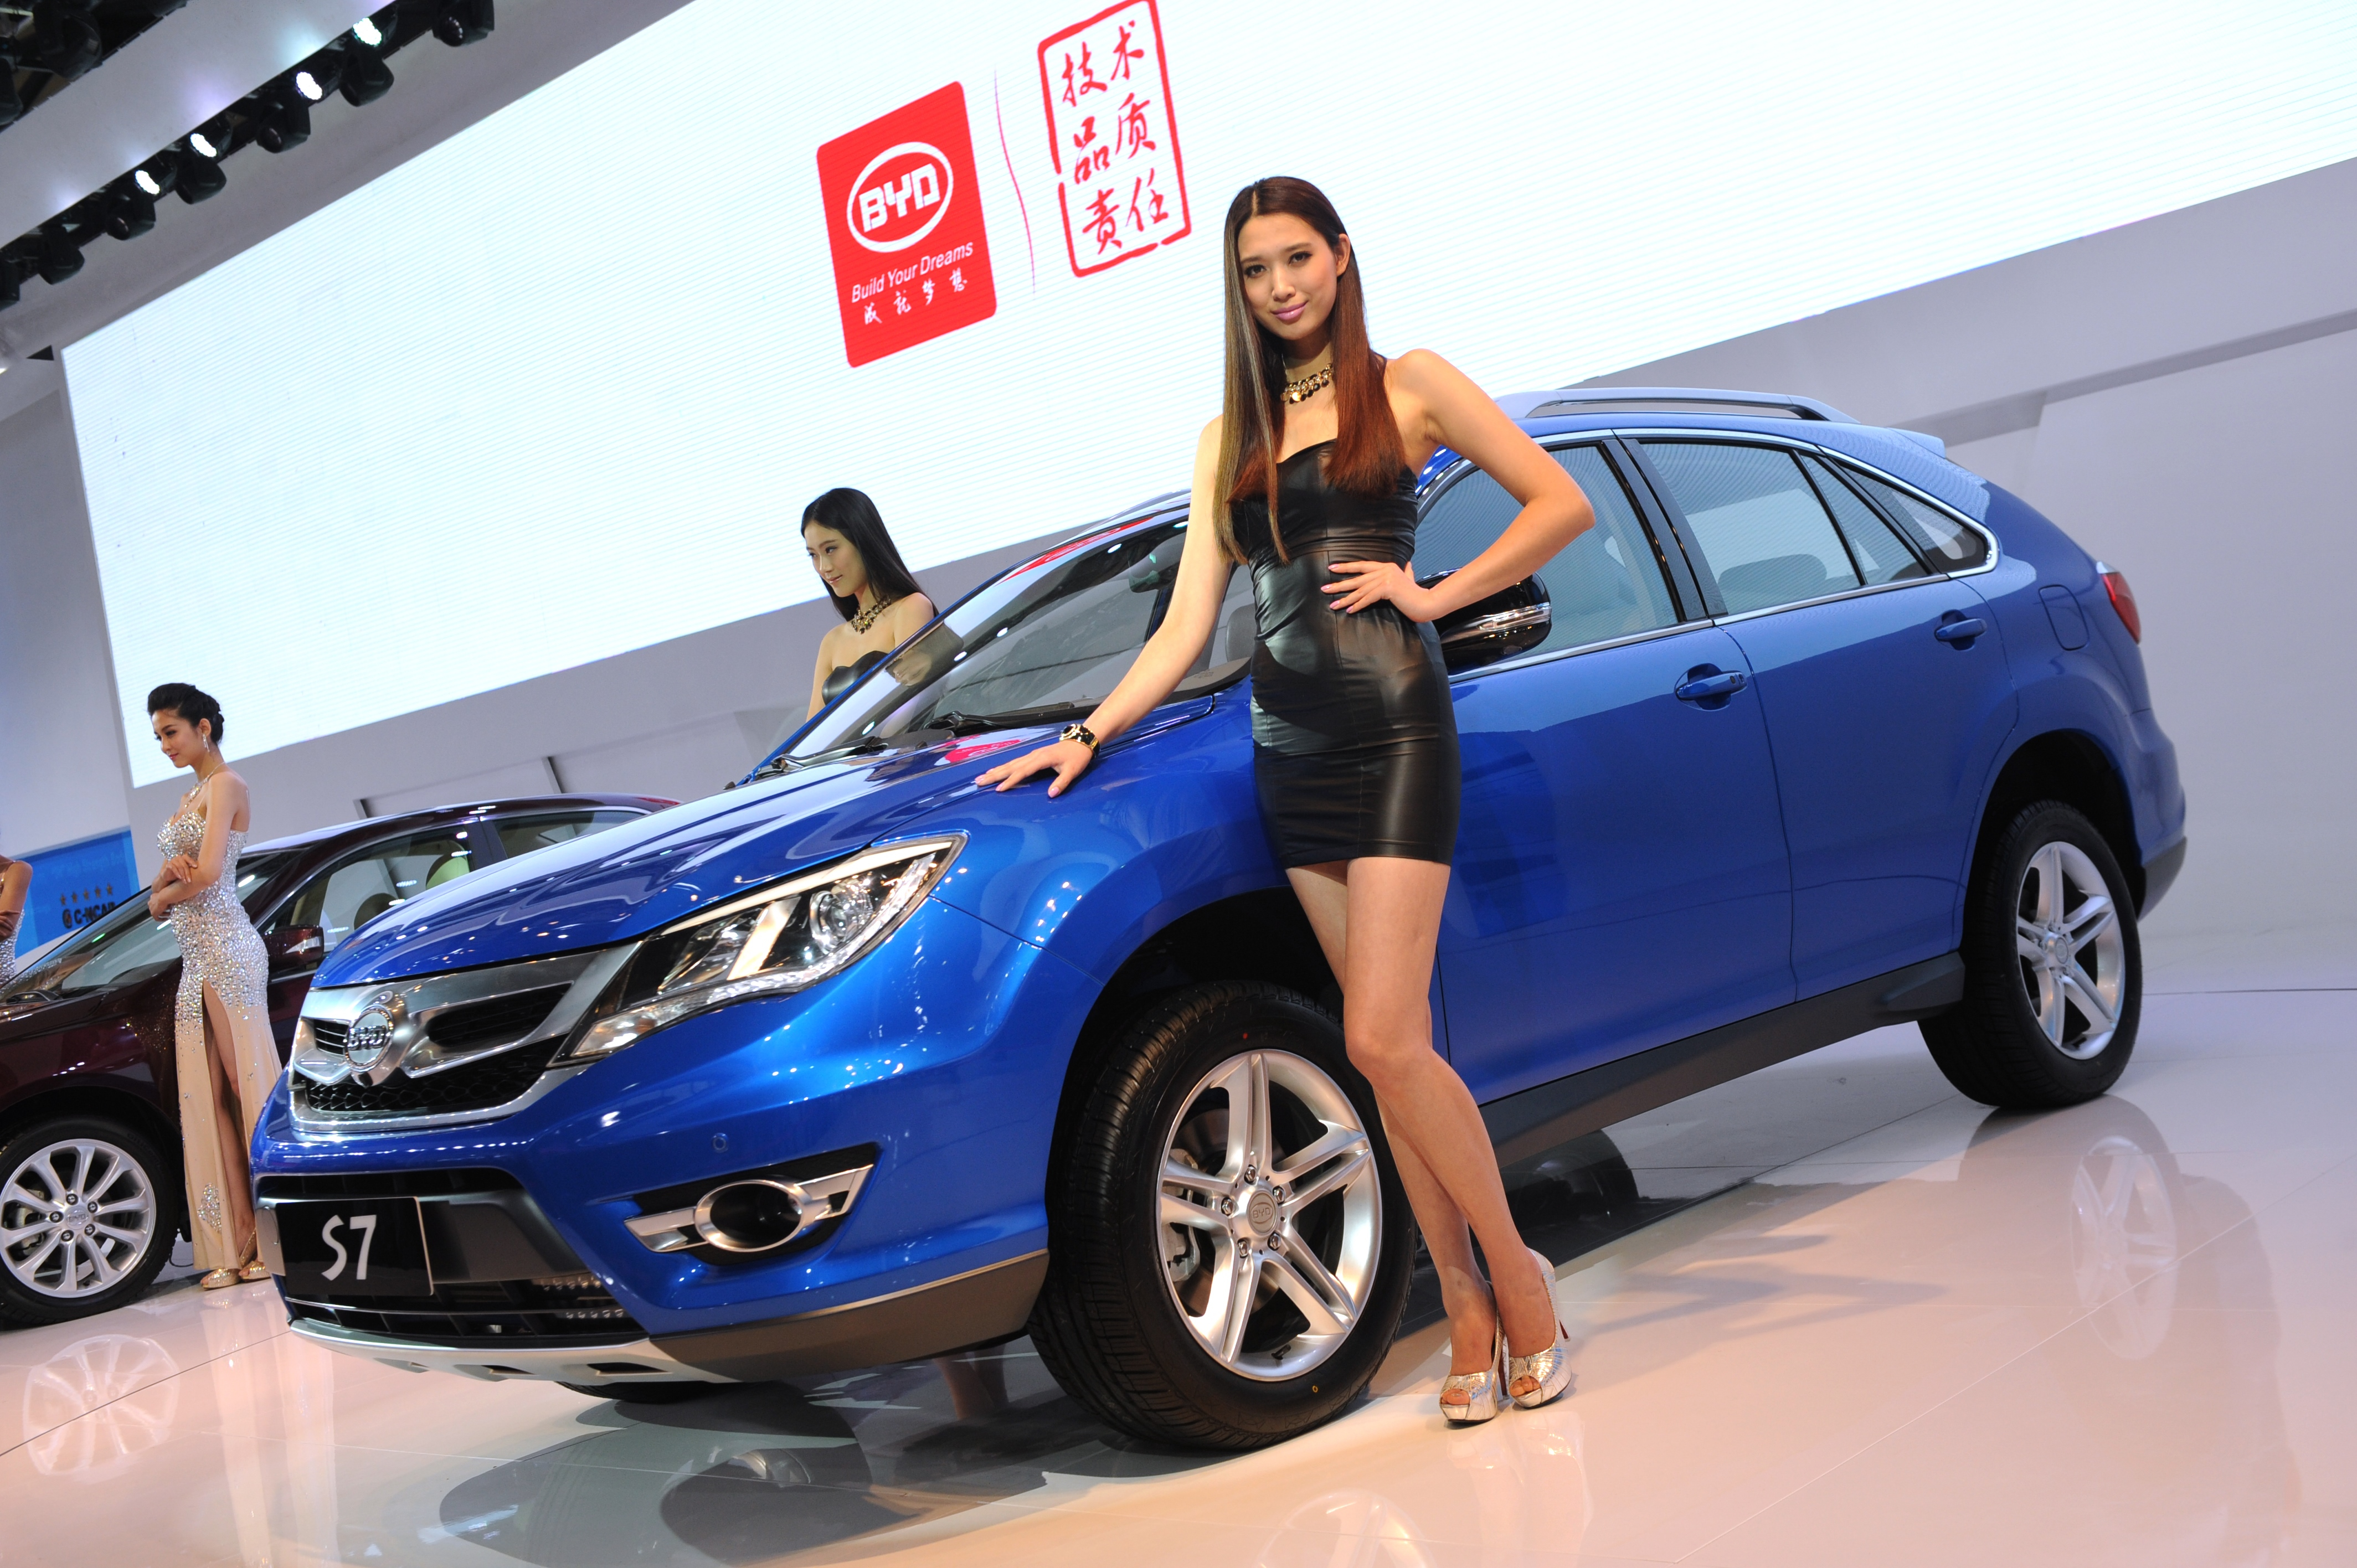 The carmaker has also announced it will issue 3 billion yuan of corporate bonds in single or multiple tranches in China. Photo: AFP